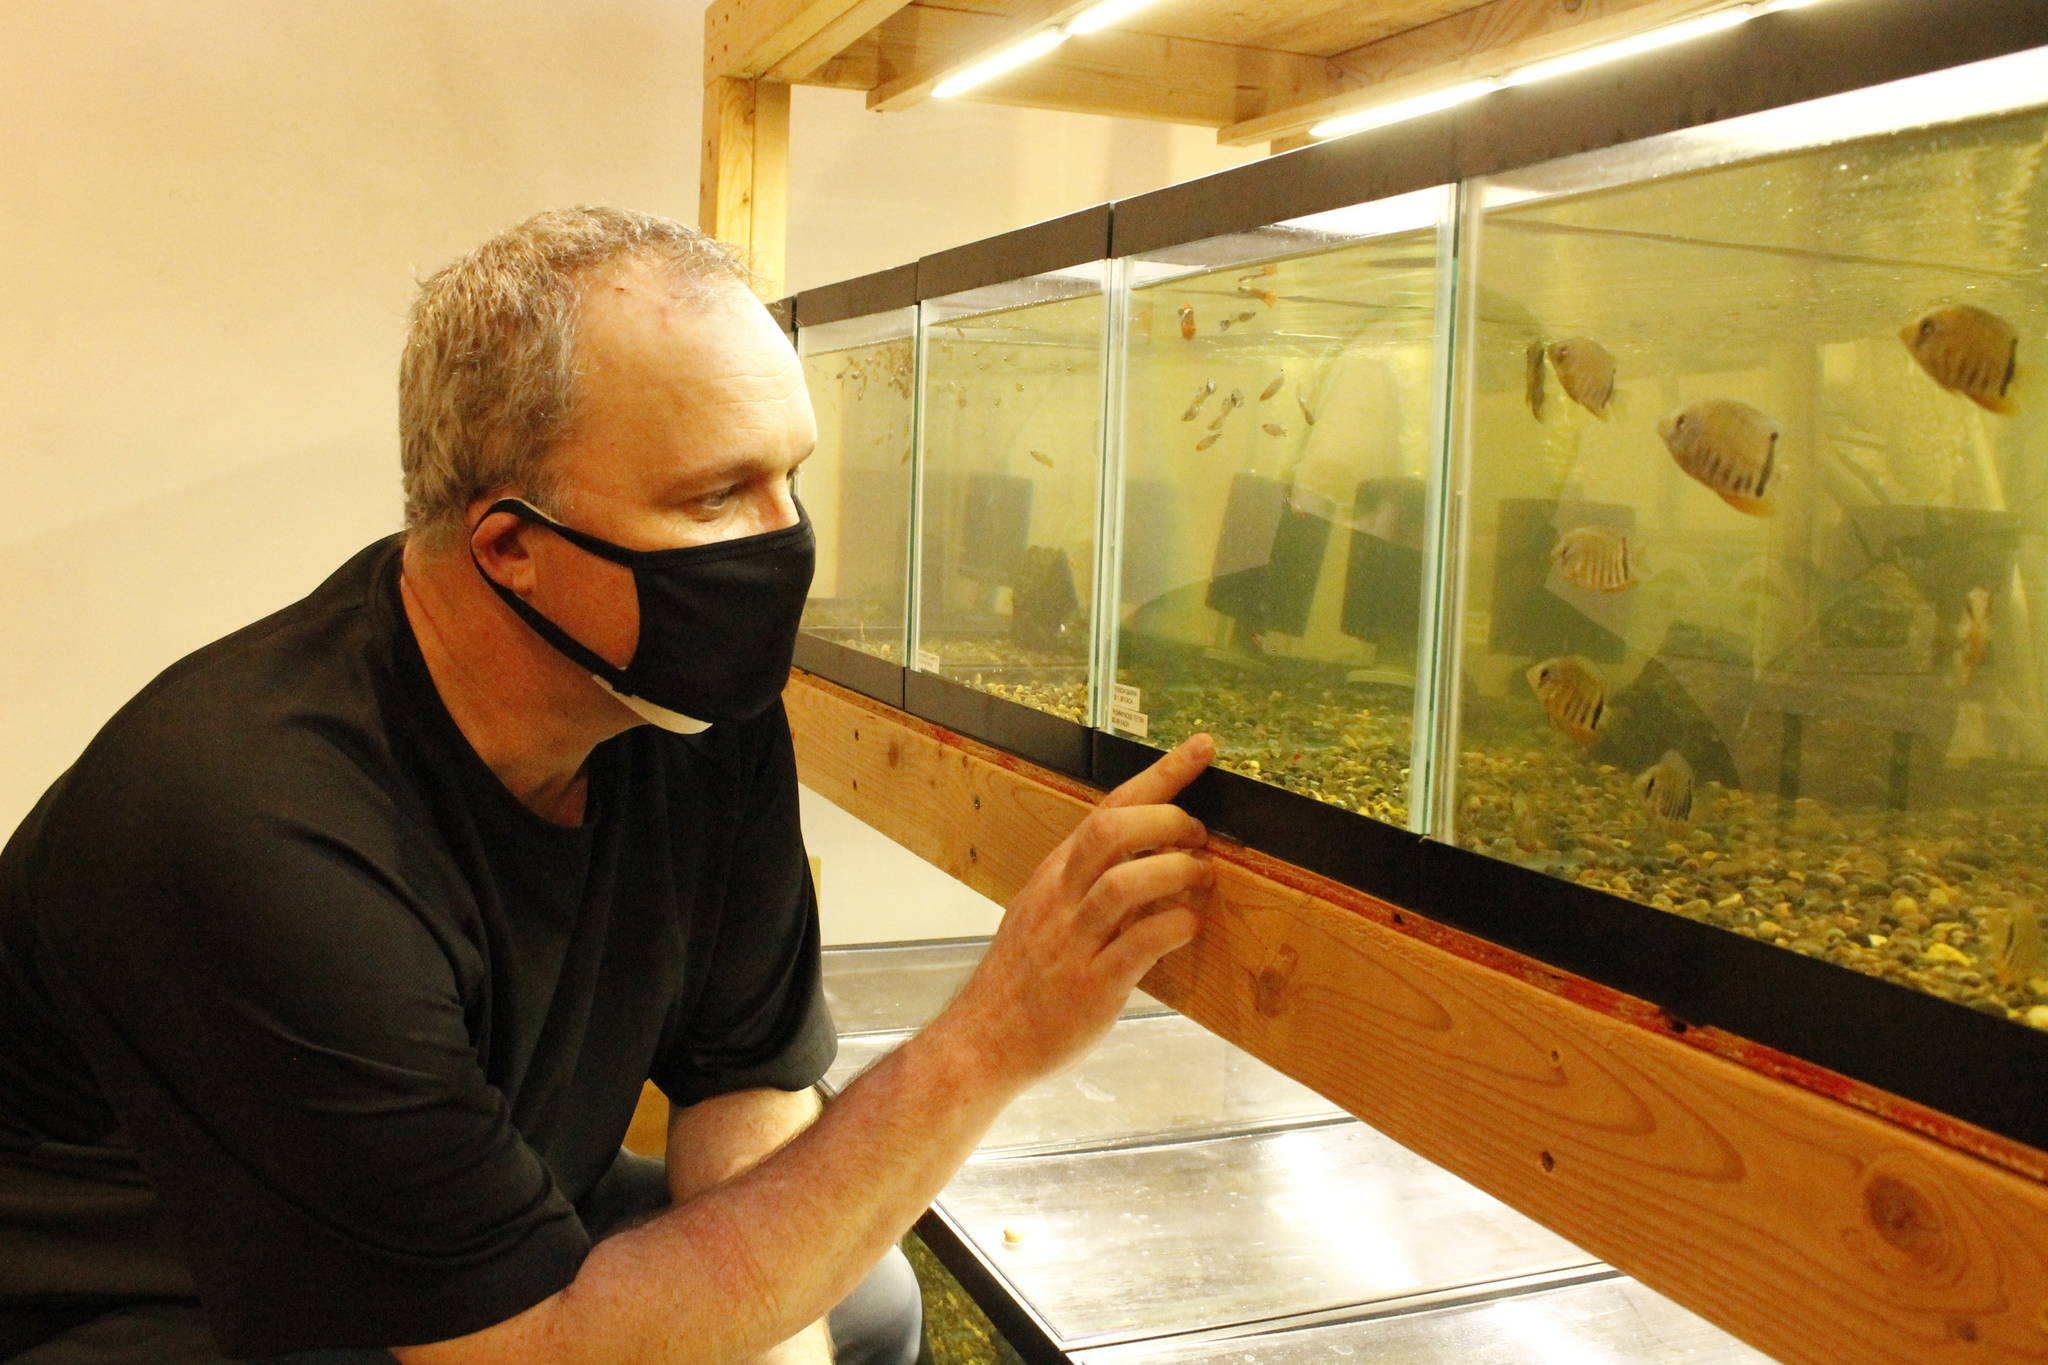 Photo by Kira Erickson/South Whidbey Record
In one of the tanks in his new store, fish follow business owner Jason Blair’s finger.